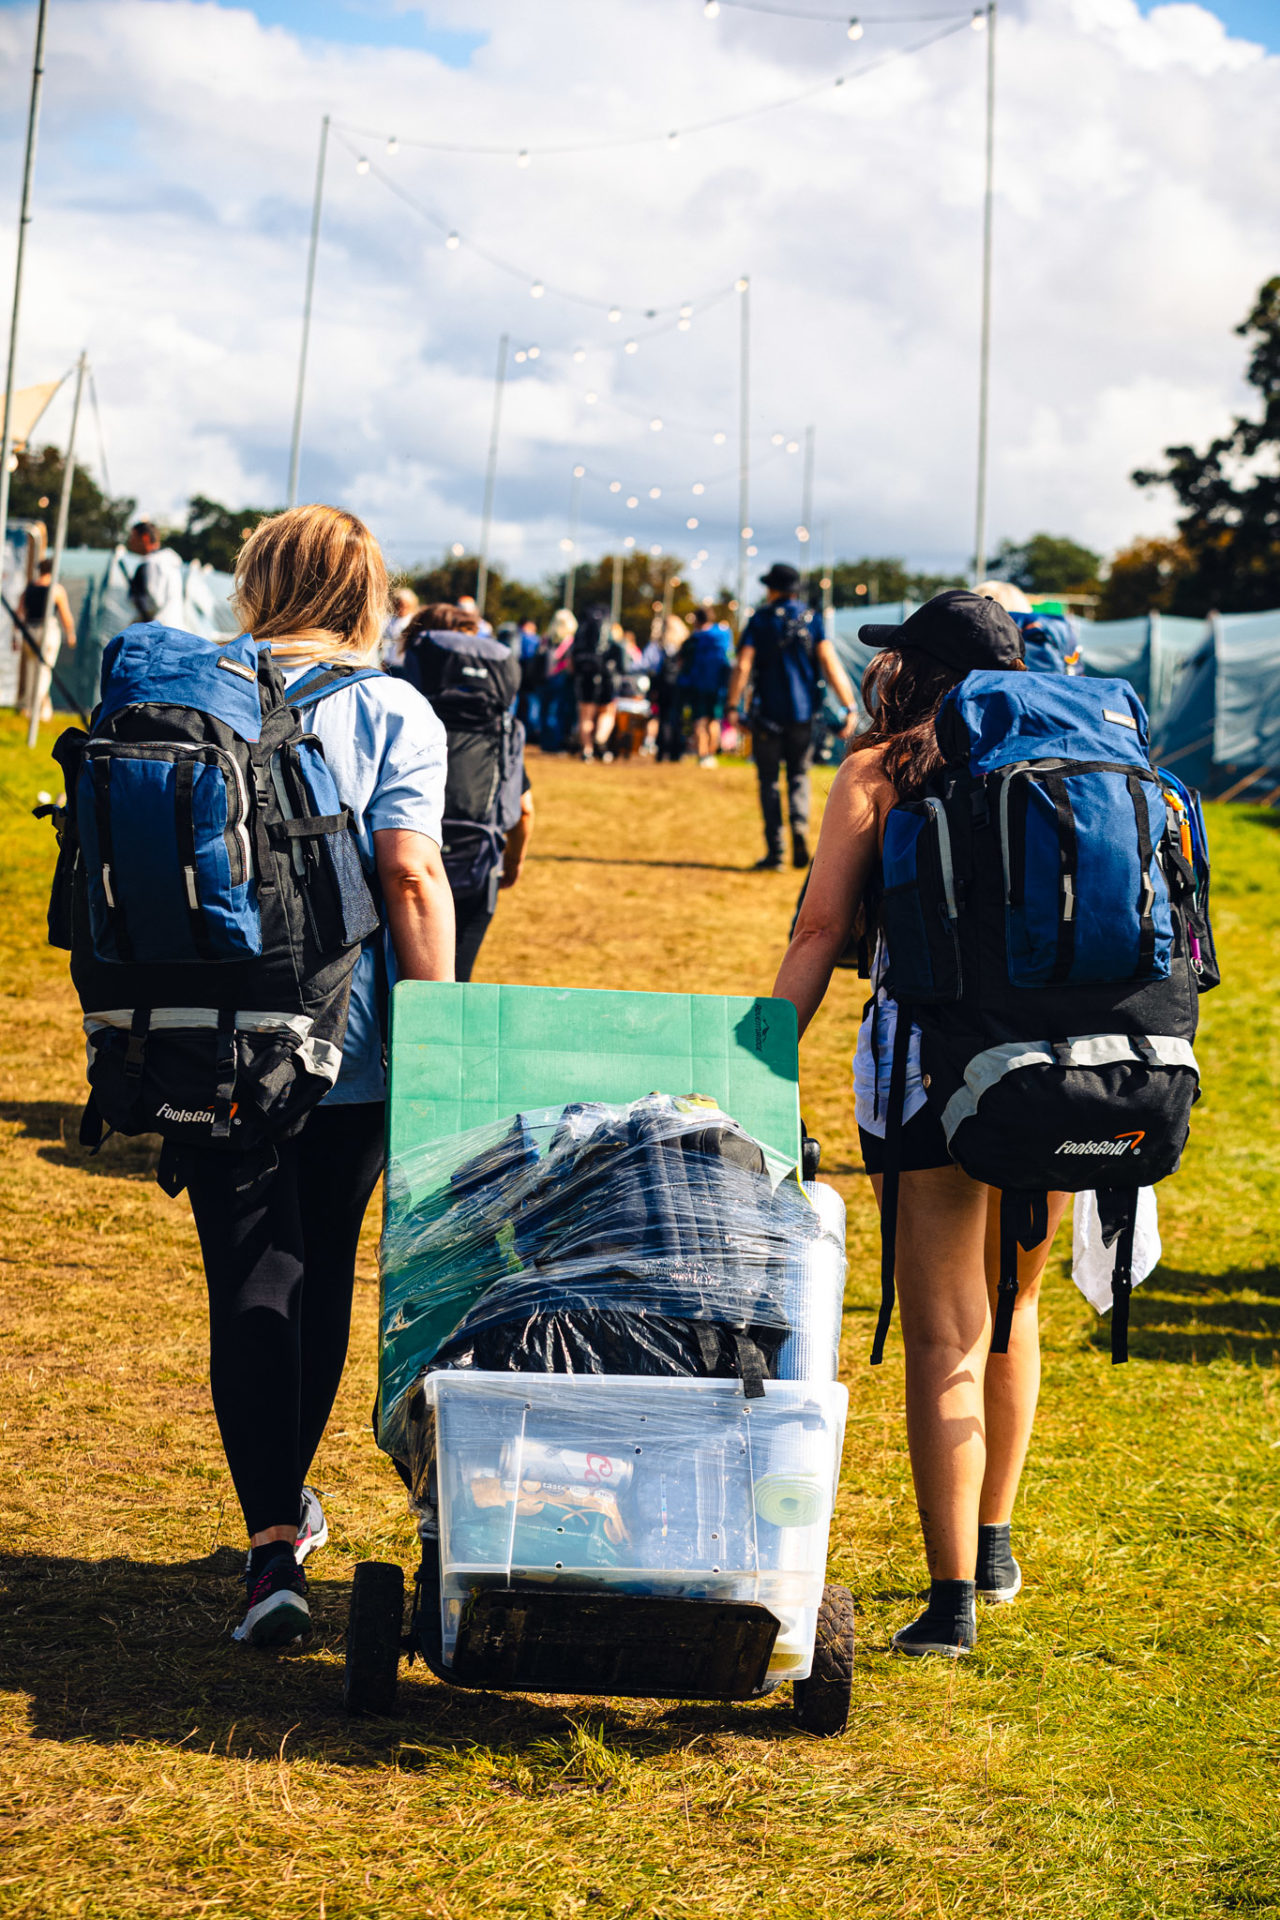 People arrive at Electric Picnic. Image: Electric Picnic